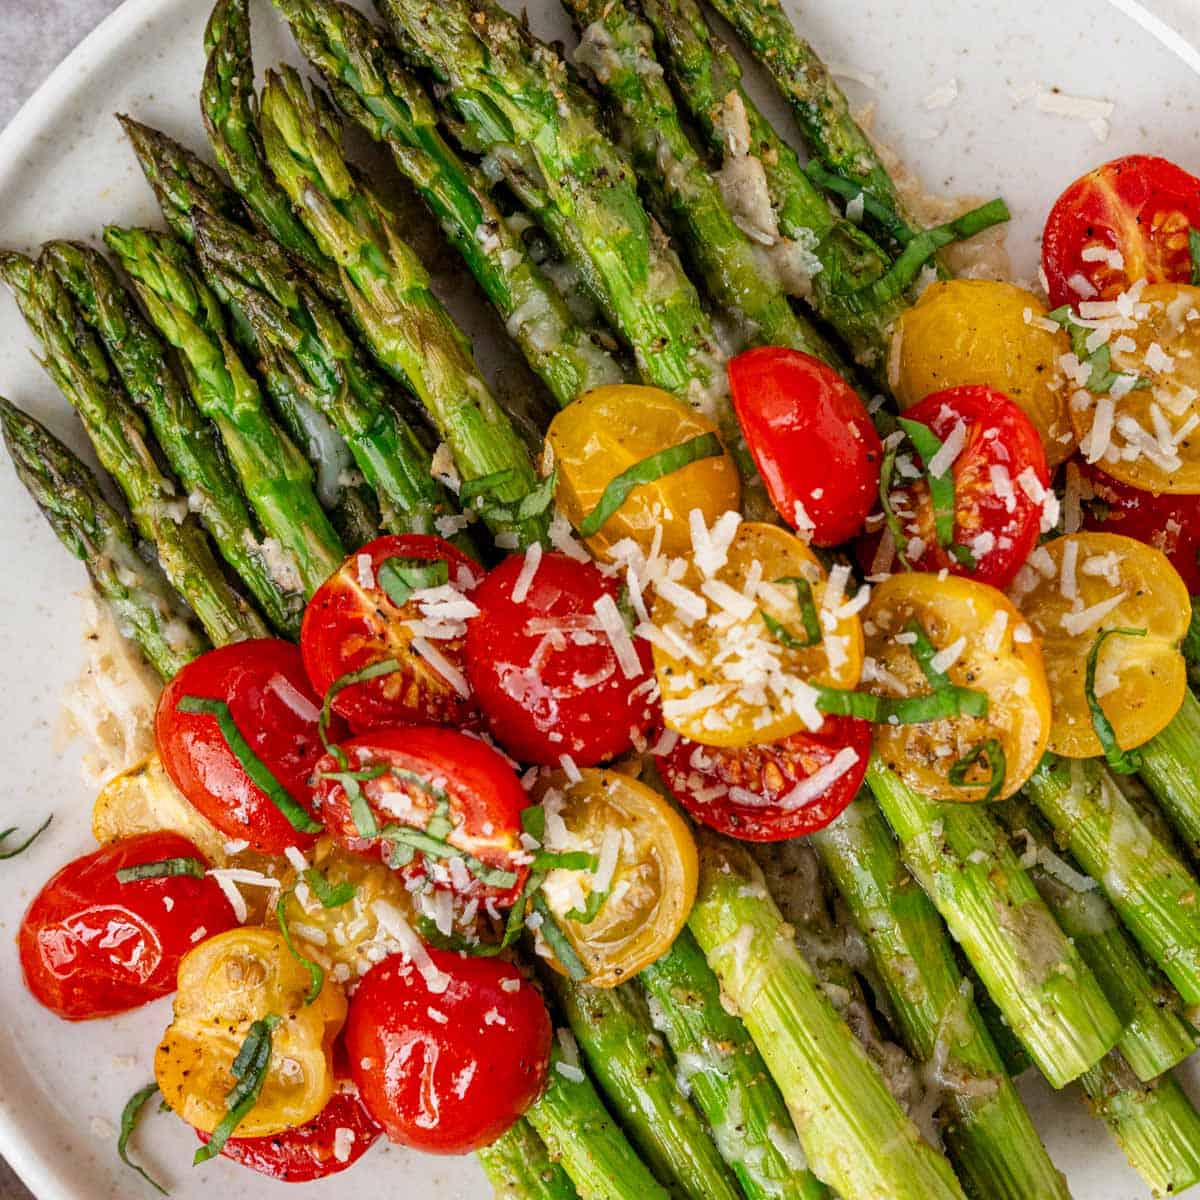 Cheesy Asparagus With Tomatoes - The Yummy Bowl